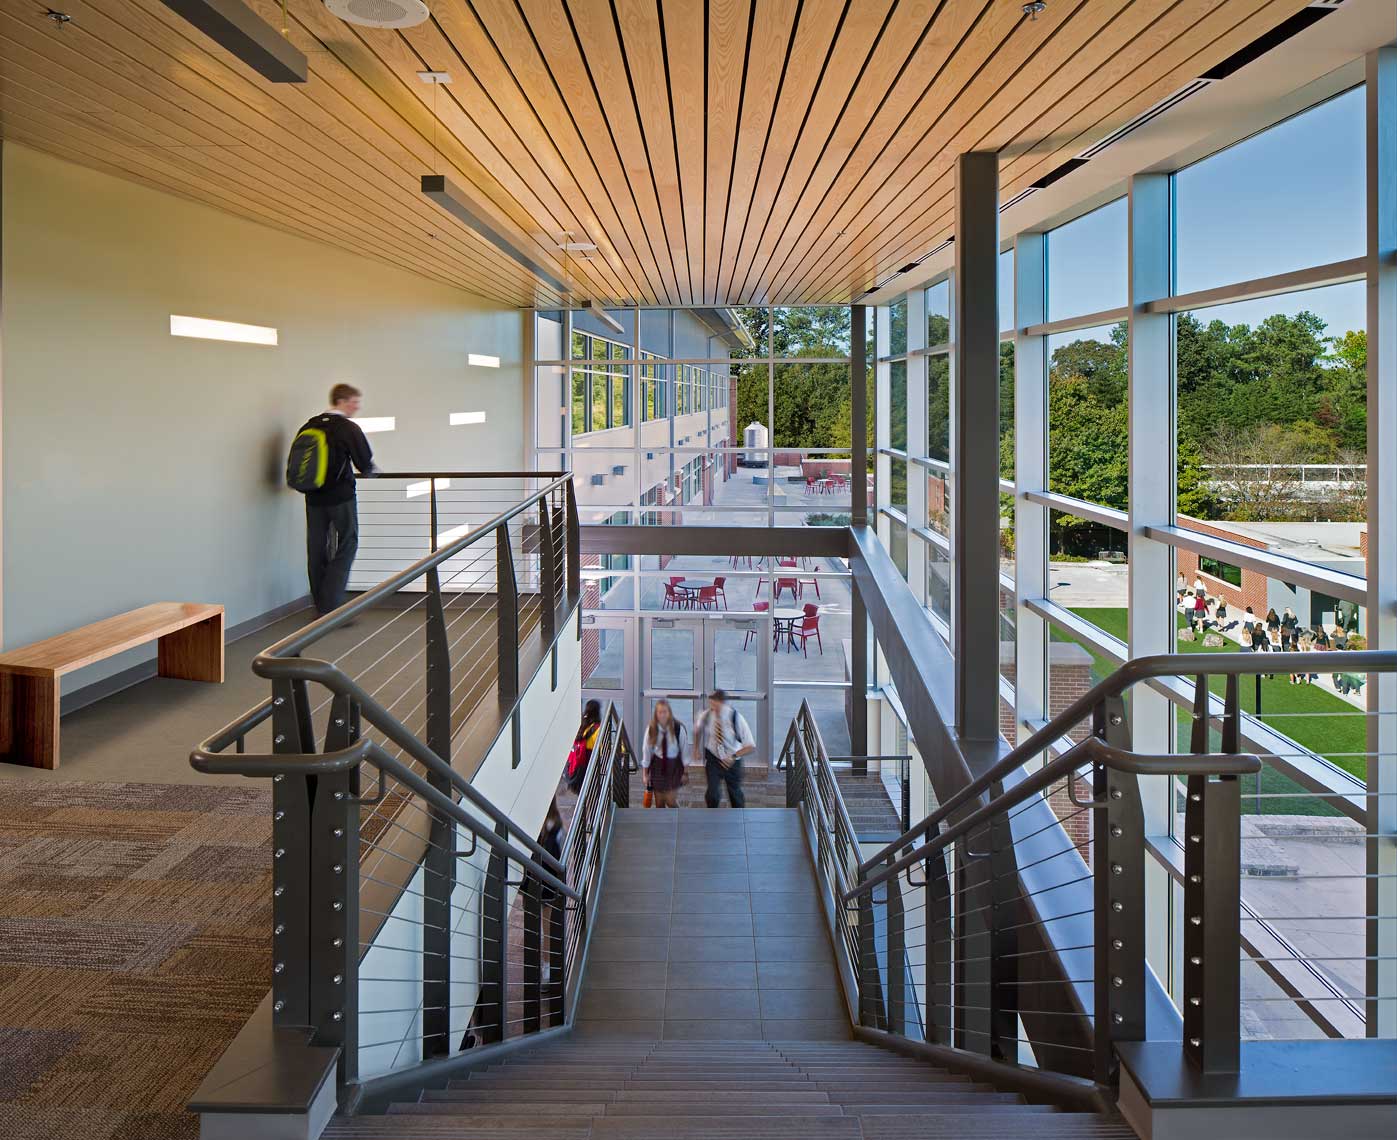 Students enjoy the airy grand stair at the Commons Building at Holy Innocents Episcopal School in Atlanta, Georgia